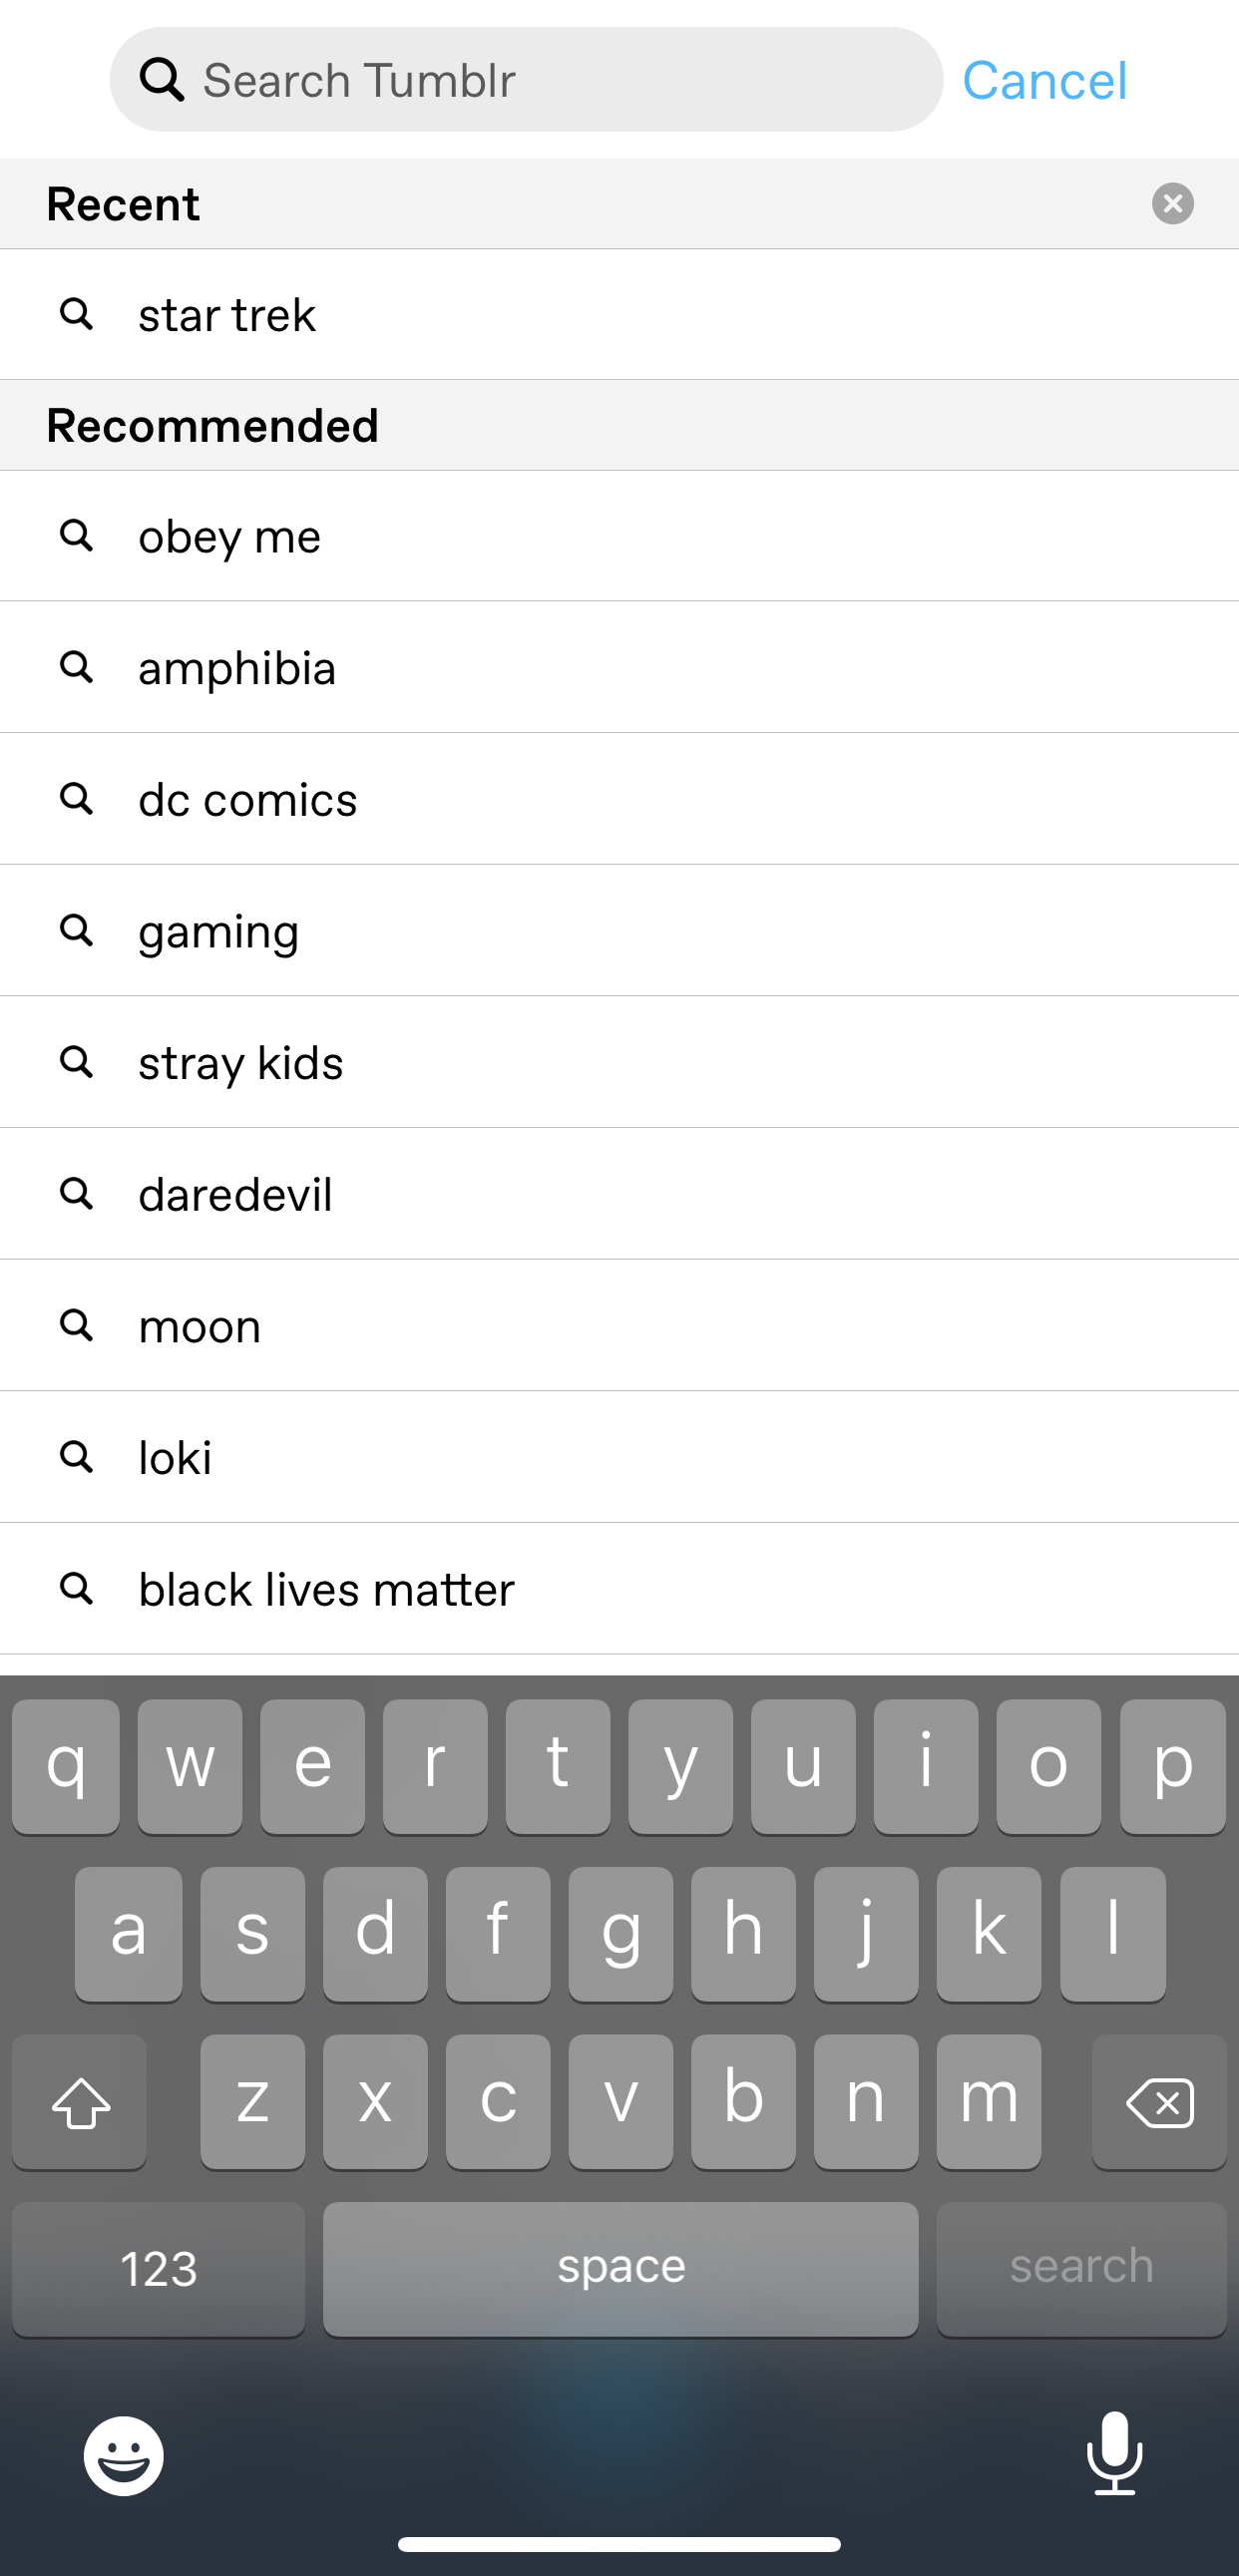 The search interface in the iOS app. At the top is the search field with a magnifying glass icon and the placeholder text: Search Tumblr. To the right of the search field is a Cancel button. Below is a section labeled Recent. There's one entry: star trek. There's a magnifying glass icon next to this entry. The next section is labeled Recommended, and there are many entries. Each entry has a magnifying glass icon to the left of it. The entries are: obey me, amphibia, dc comics, gaming, stray kids, daredevil, moon, loki, and black lives matter. The rest of the entries are covered by the iPhone keyboard.